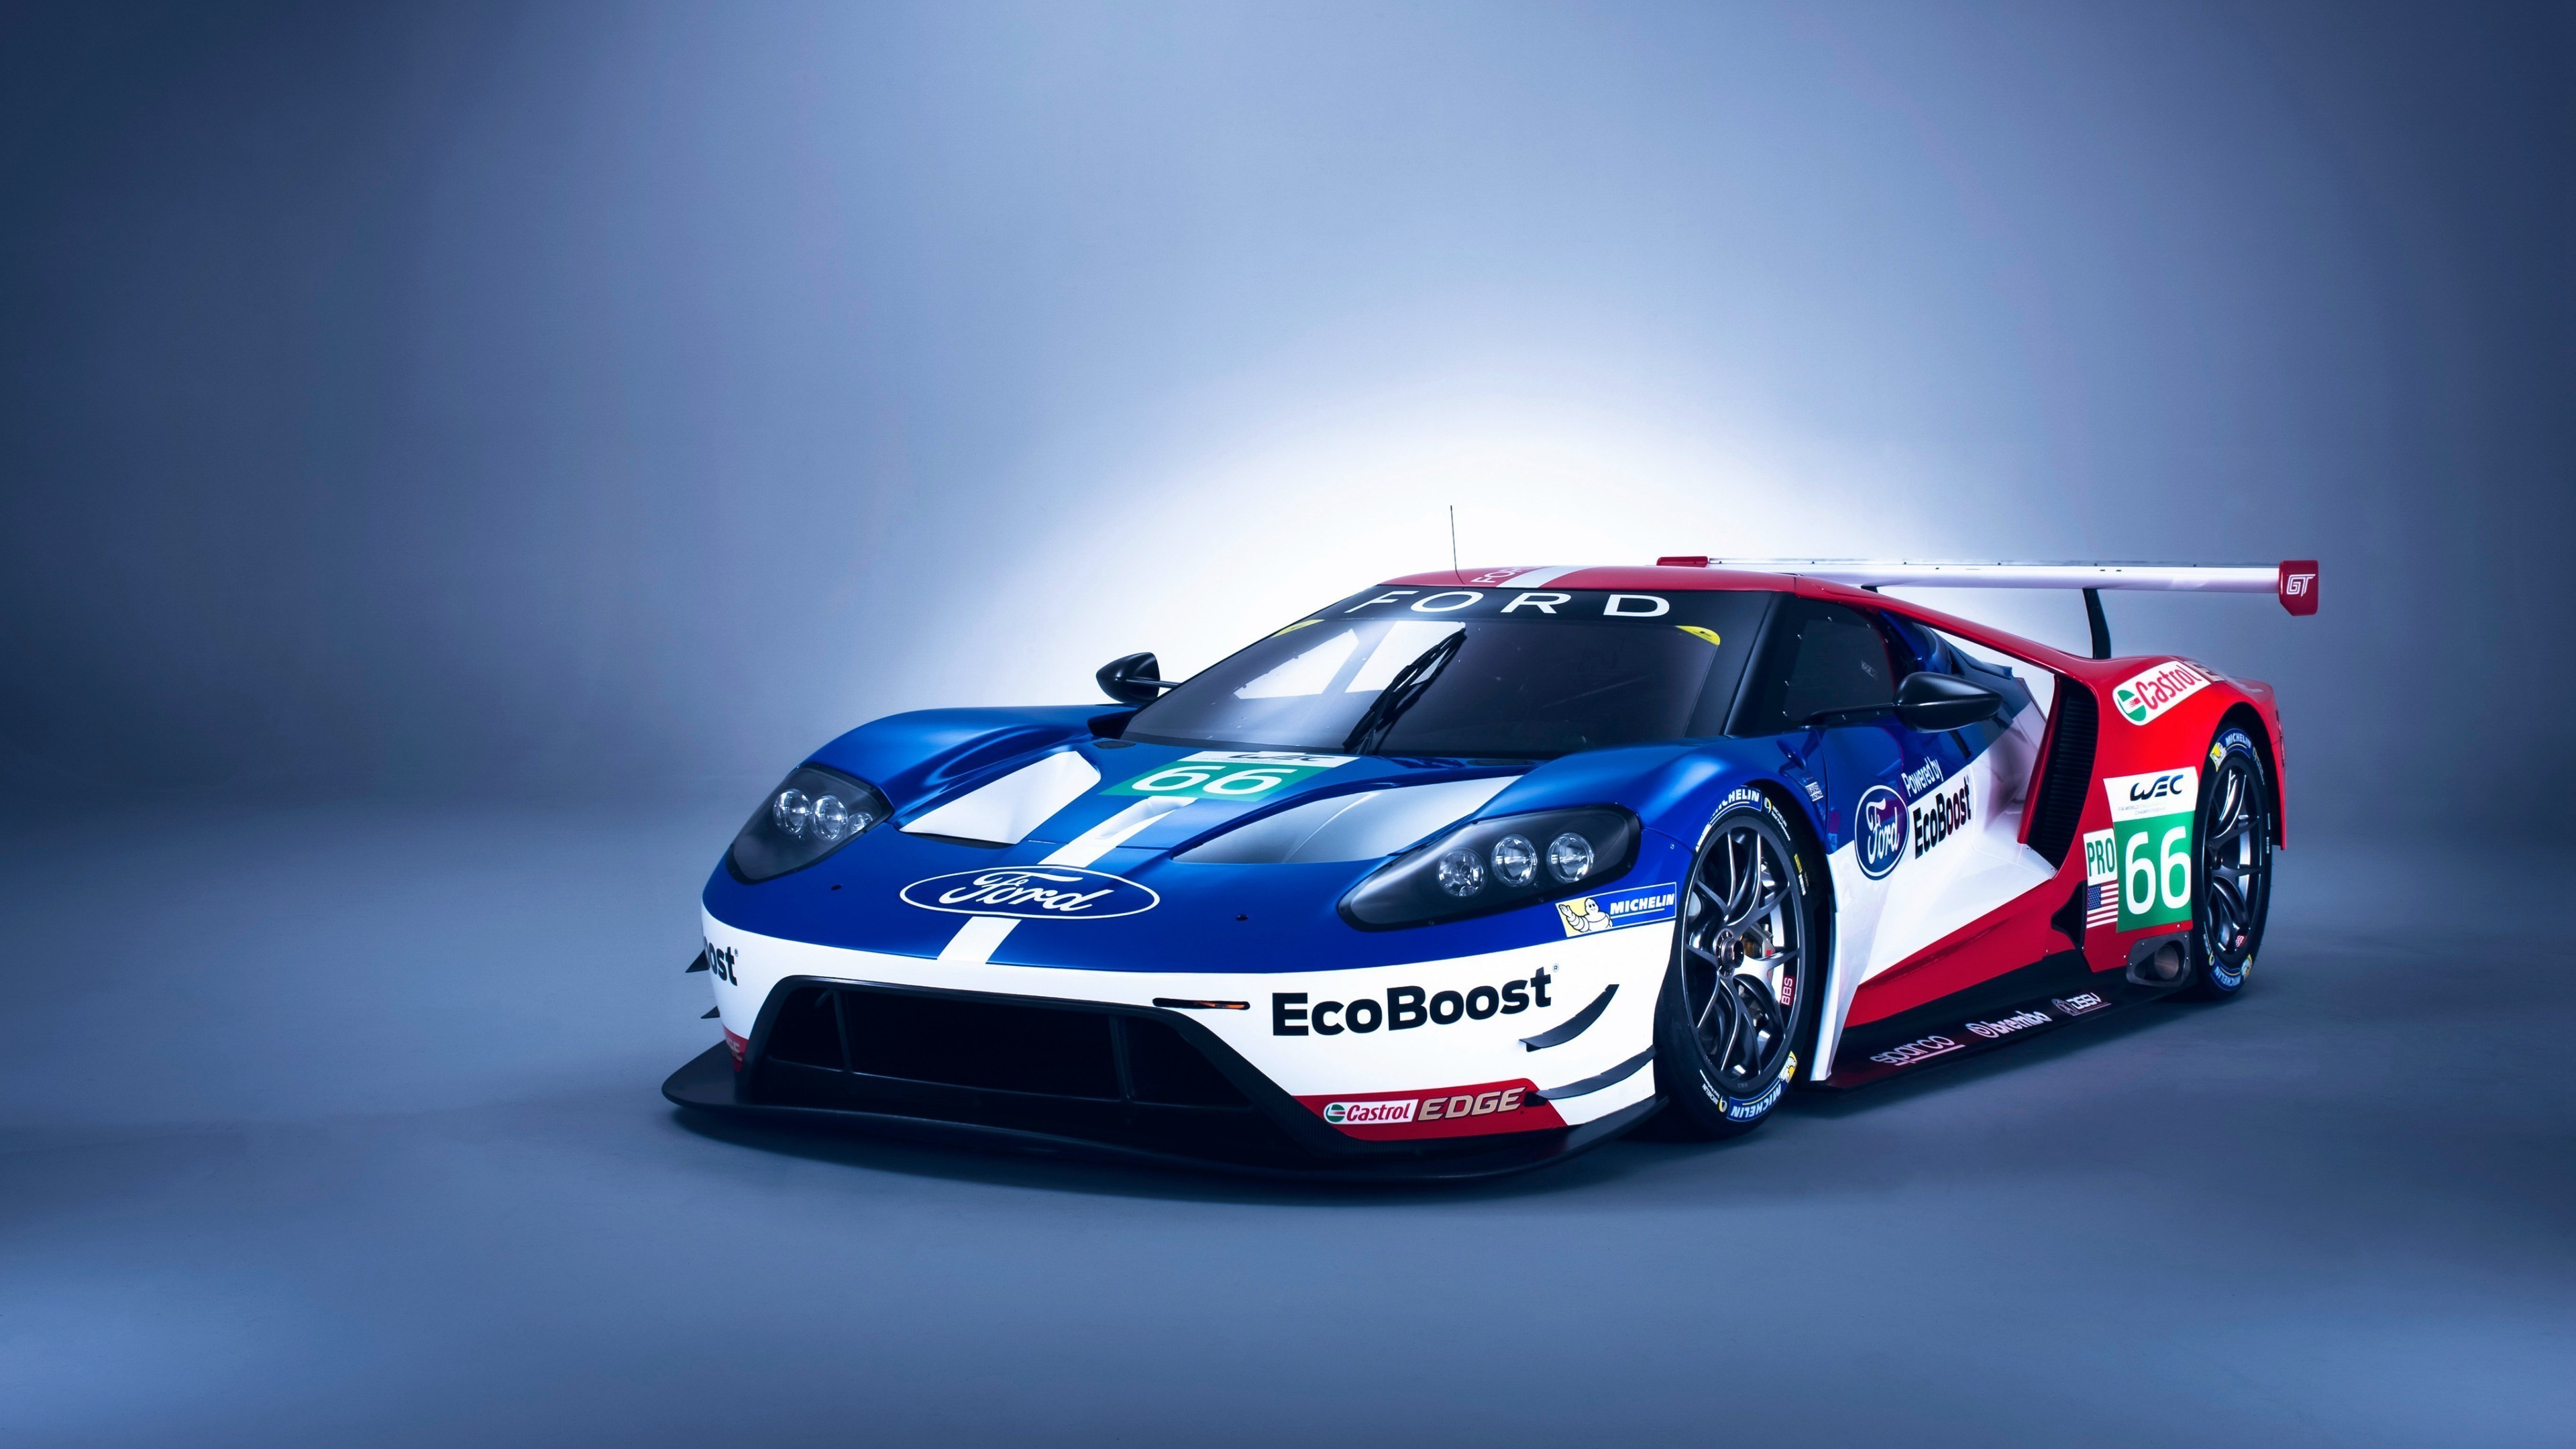 3840x2160 Ford Gt Wallpaper Studio 10 Tens Of Thousands Hd And How To Change On Edge